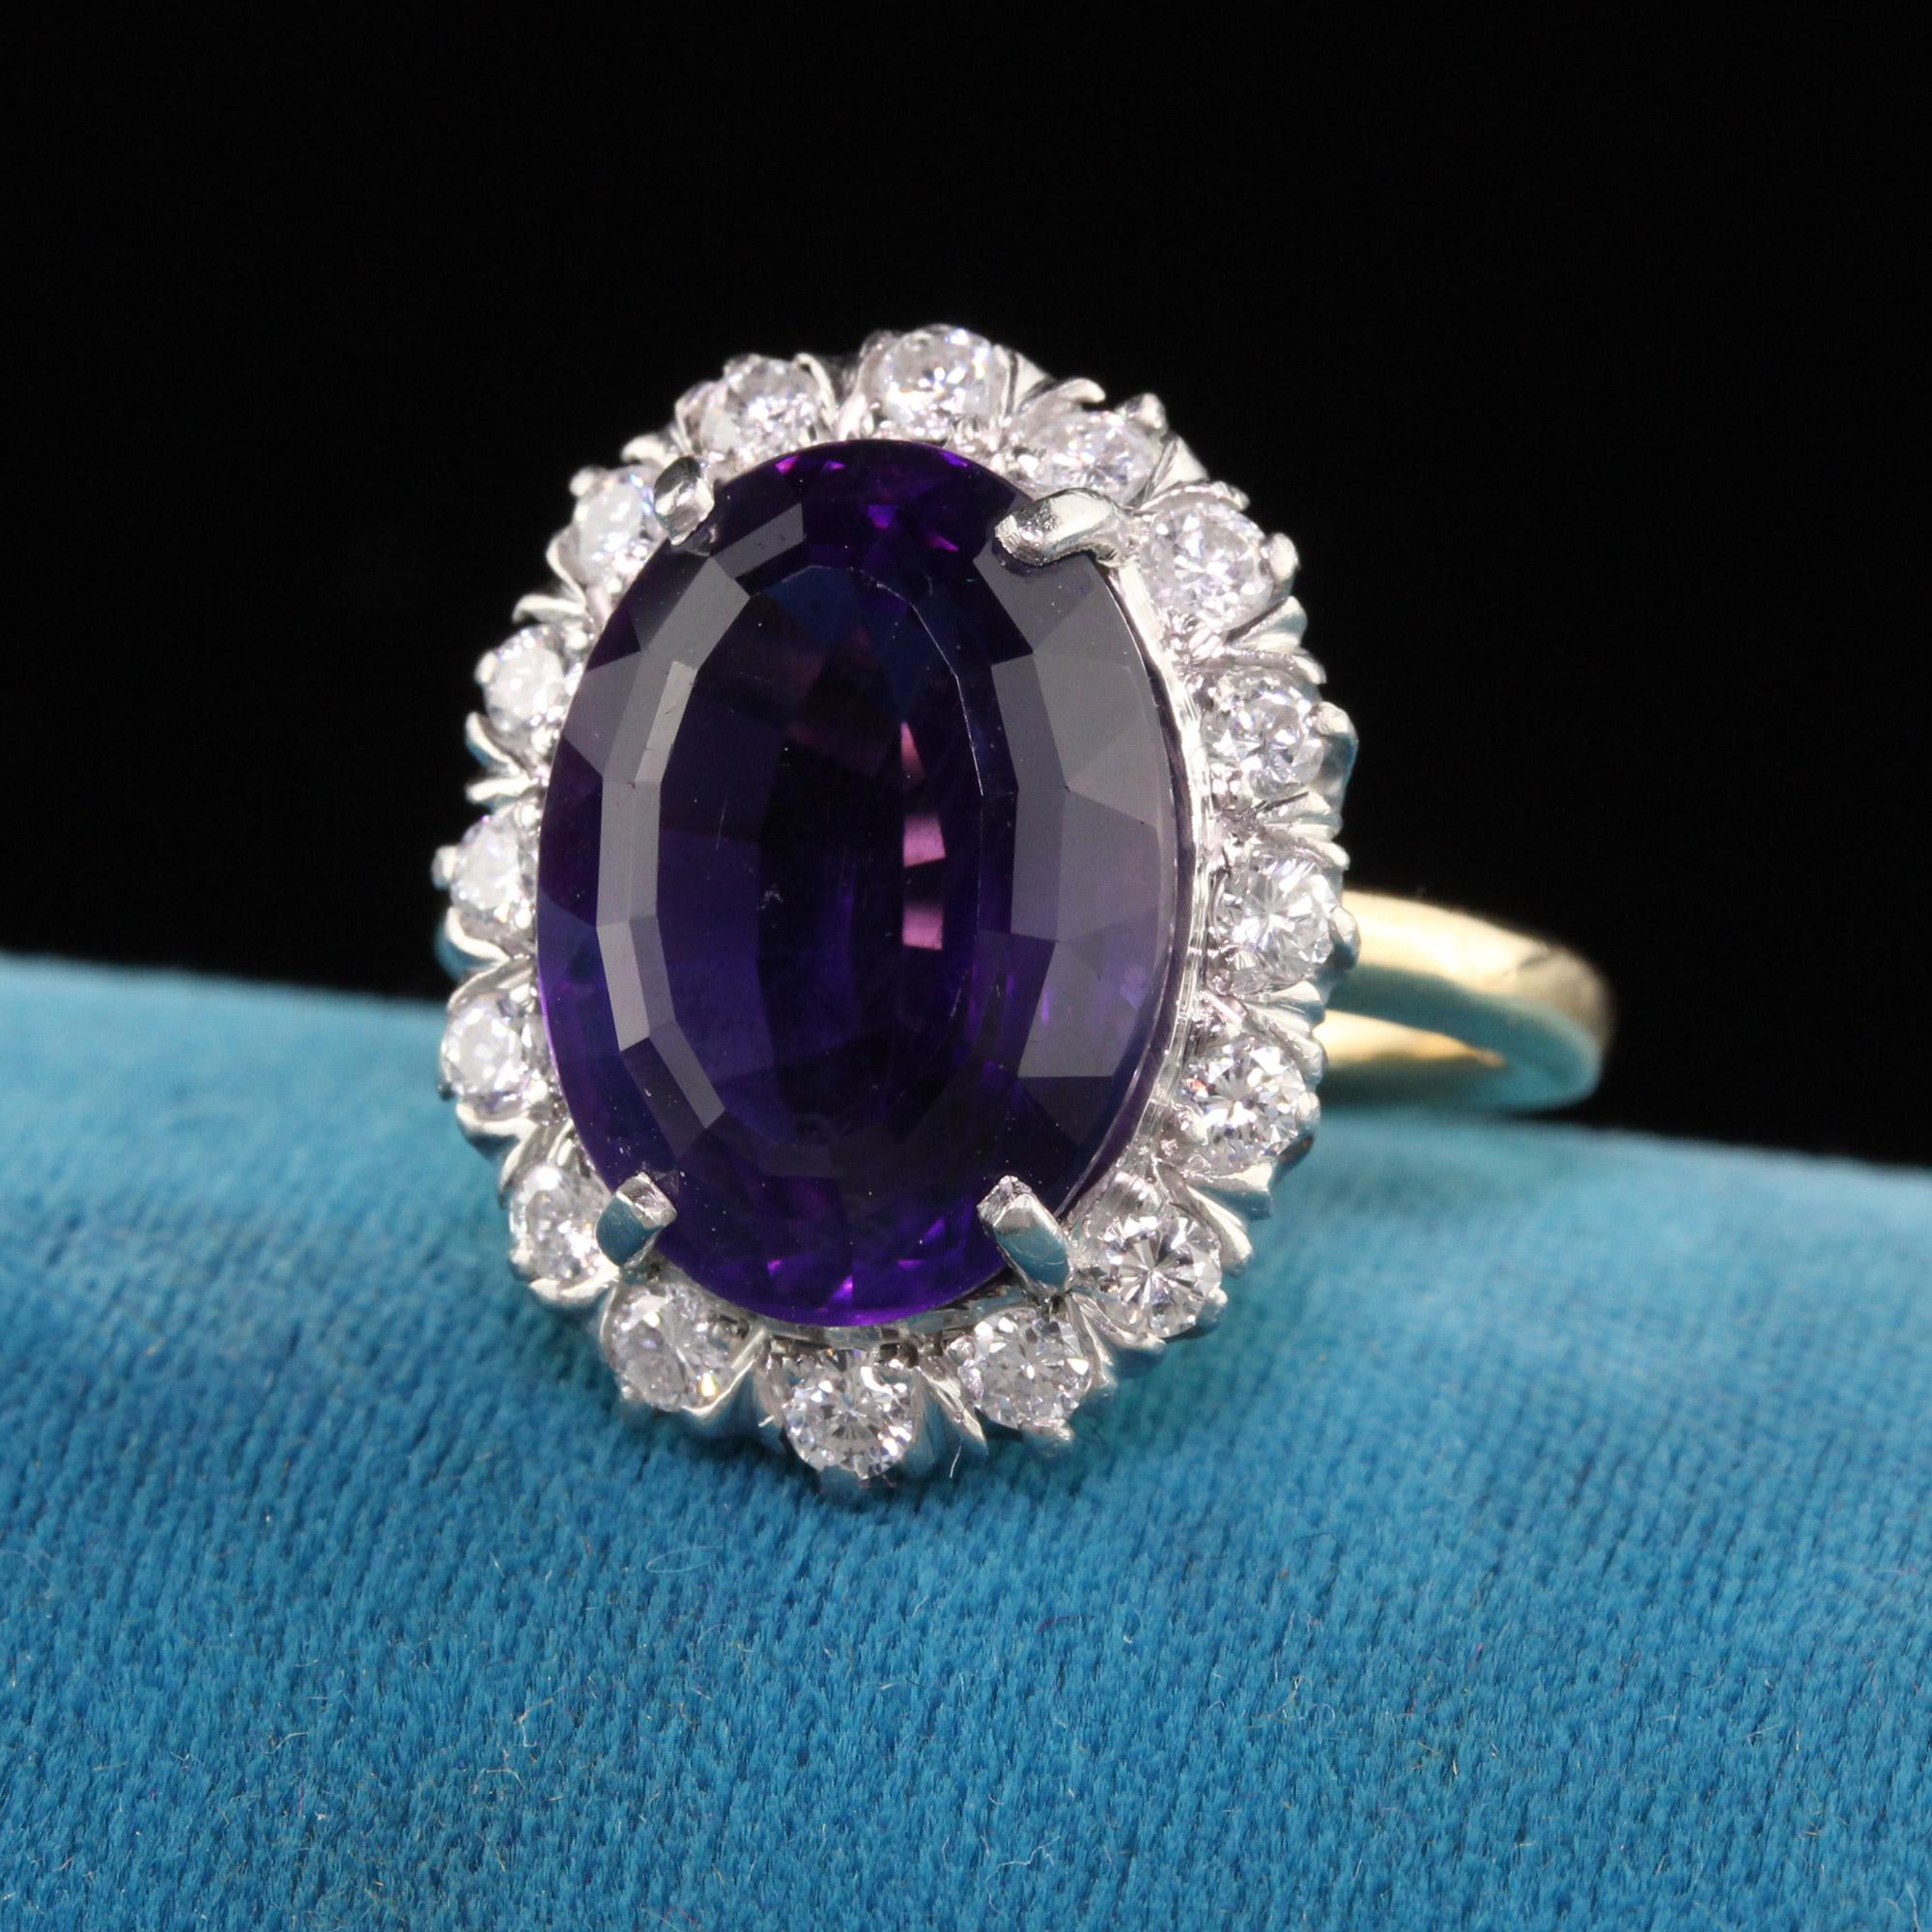 Beautiful Retro Tiffany and Co 18K Gold and Platinum Diamond Amethyst Engagement Ring. This gorgeous ring is crafted in 18K yellow gold and platinum. The ring is made by Tiffany and Co and has a nice clean amethyst in the center with white diamonds